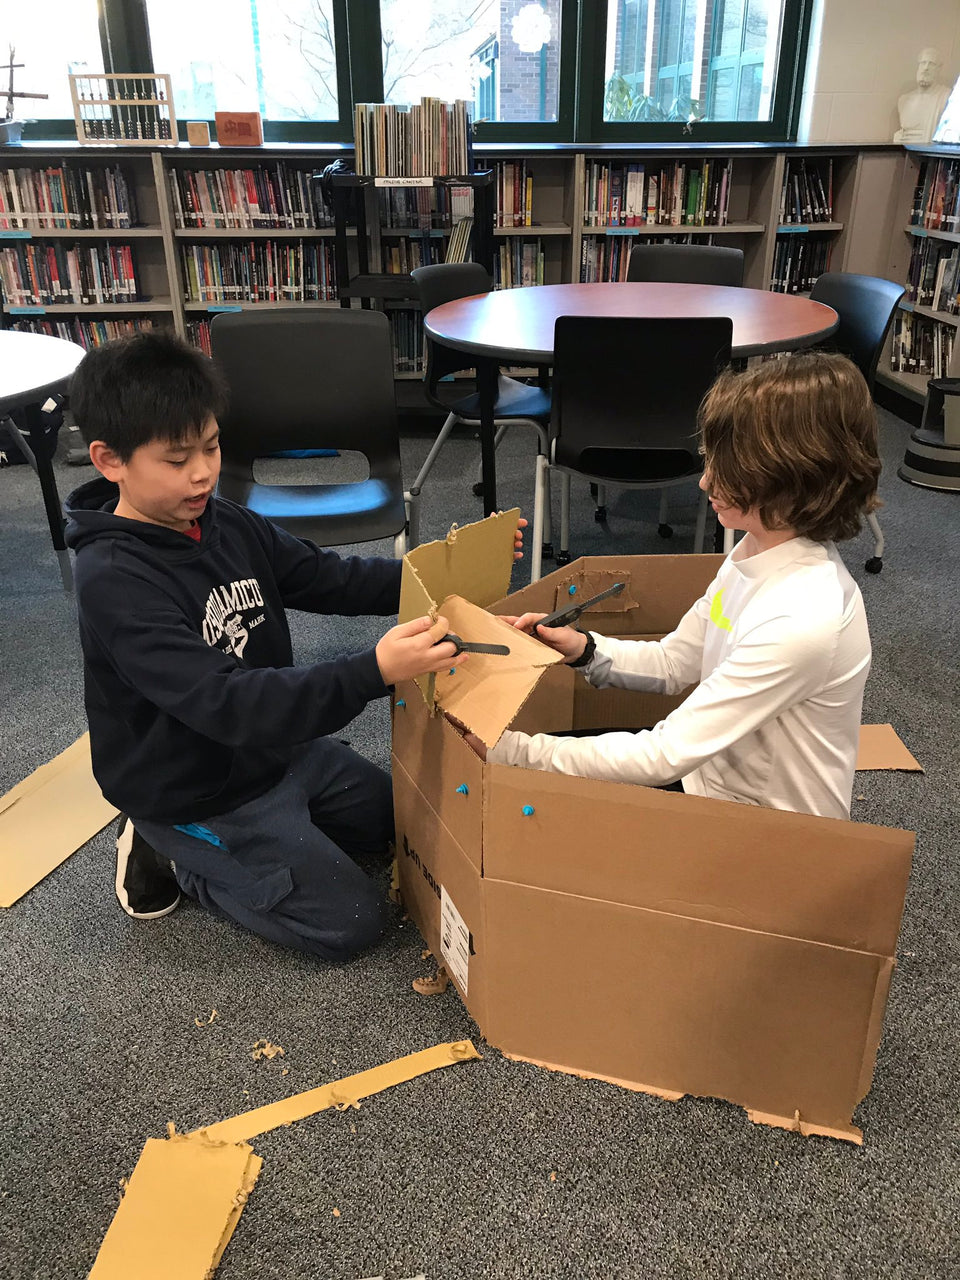 Building a cardboard fort with the Makedo cardboard construction system